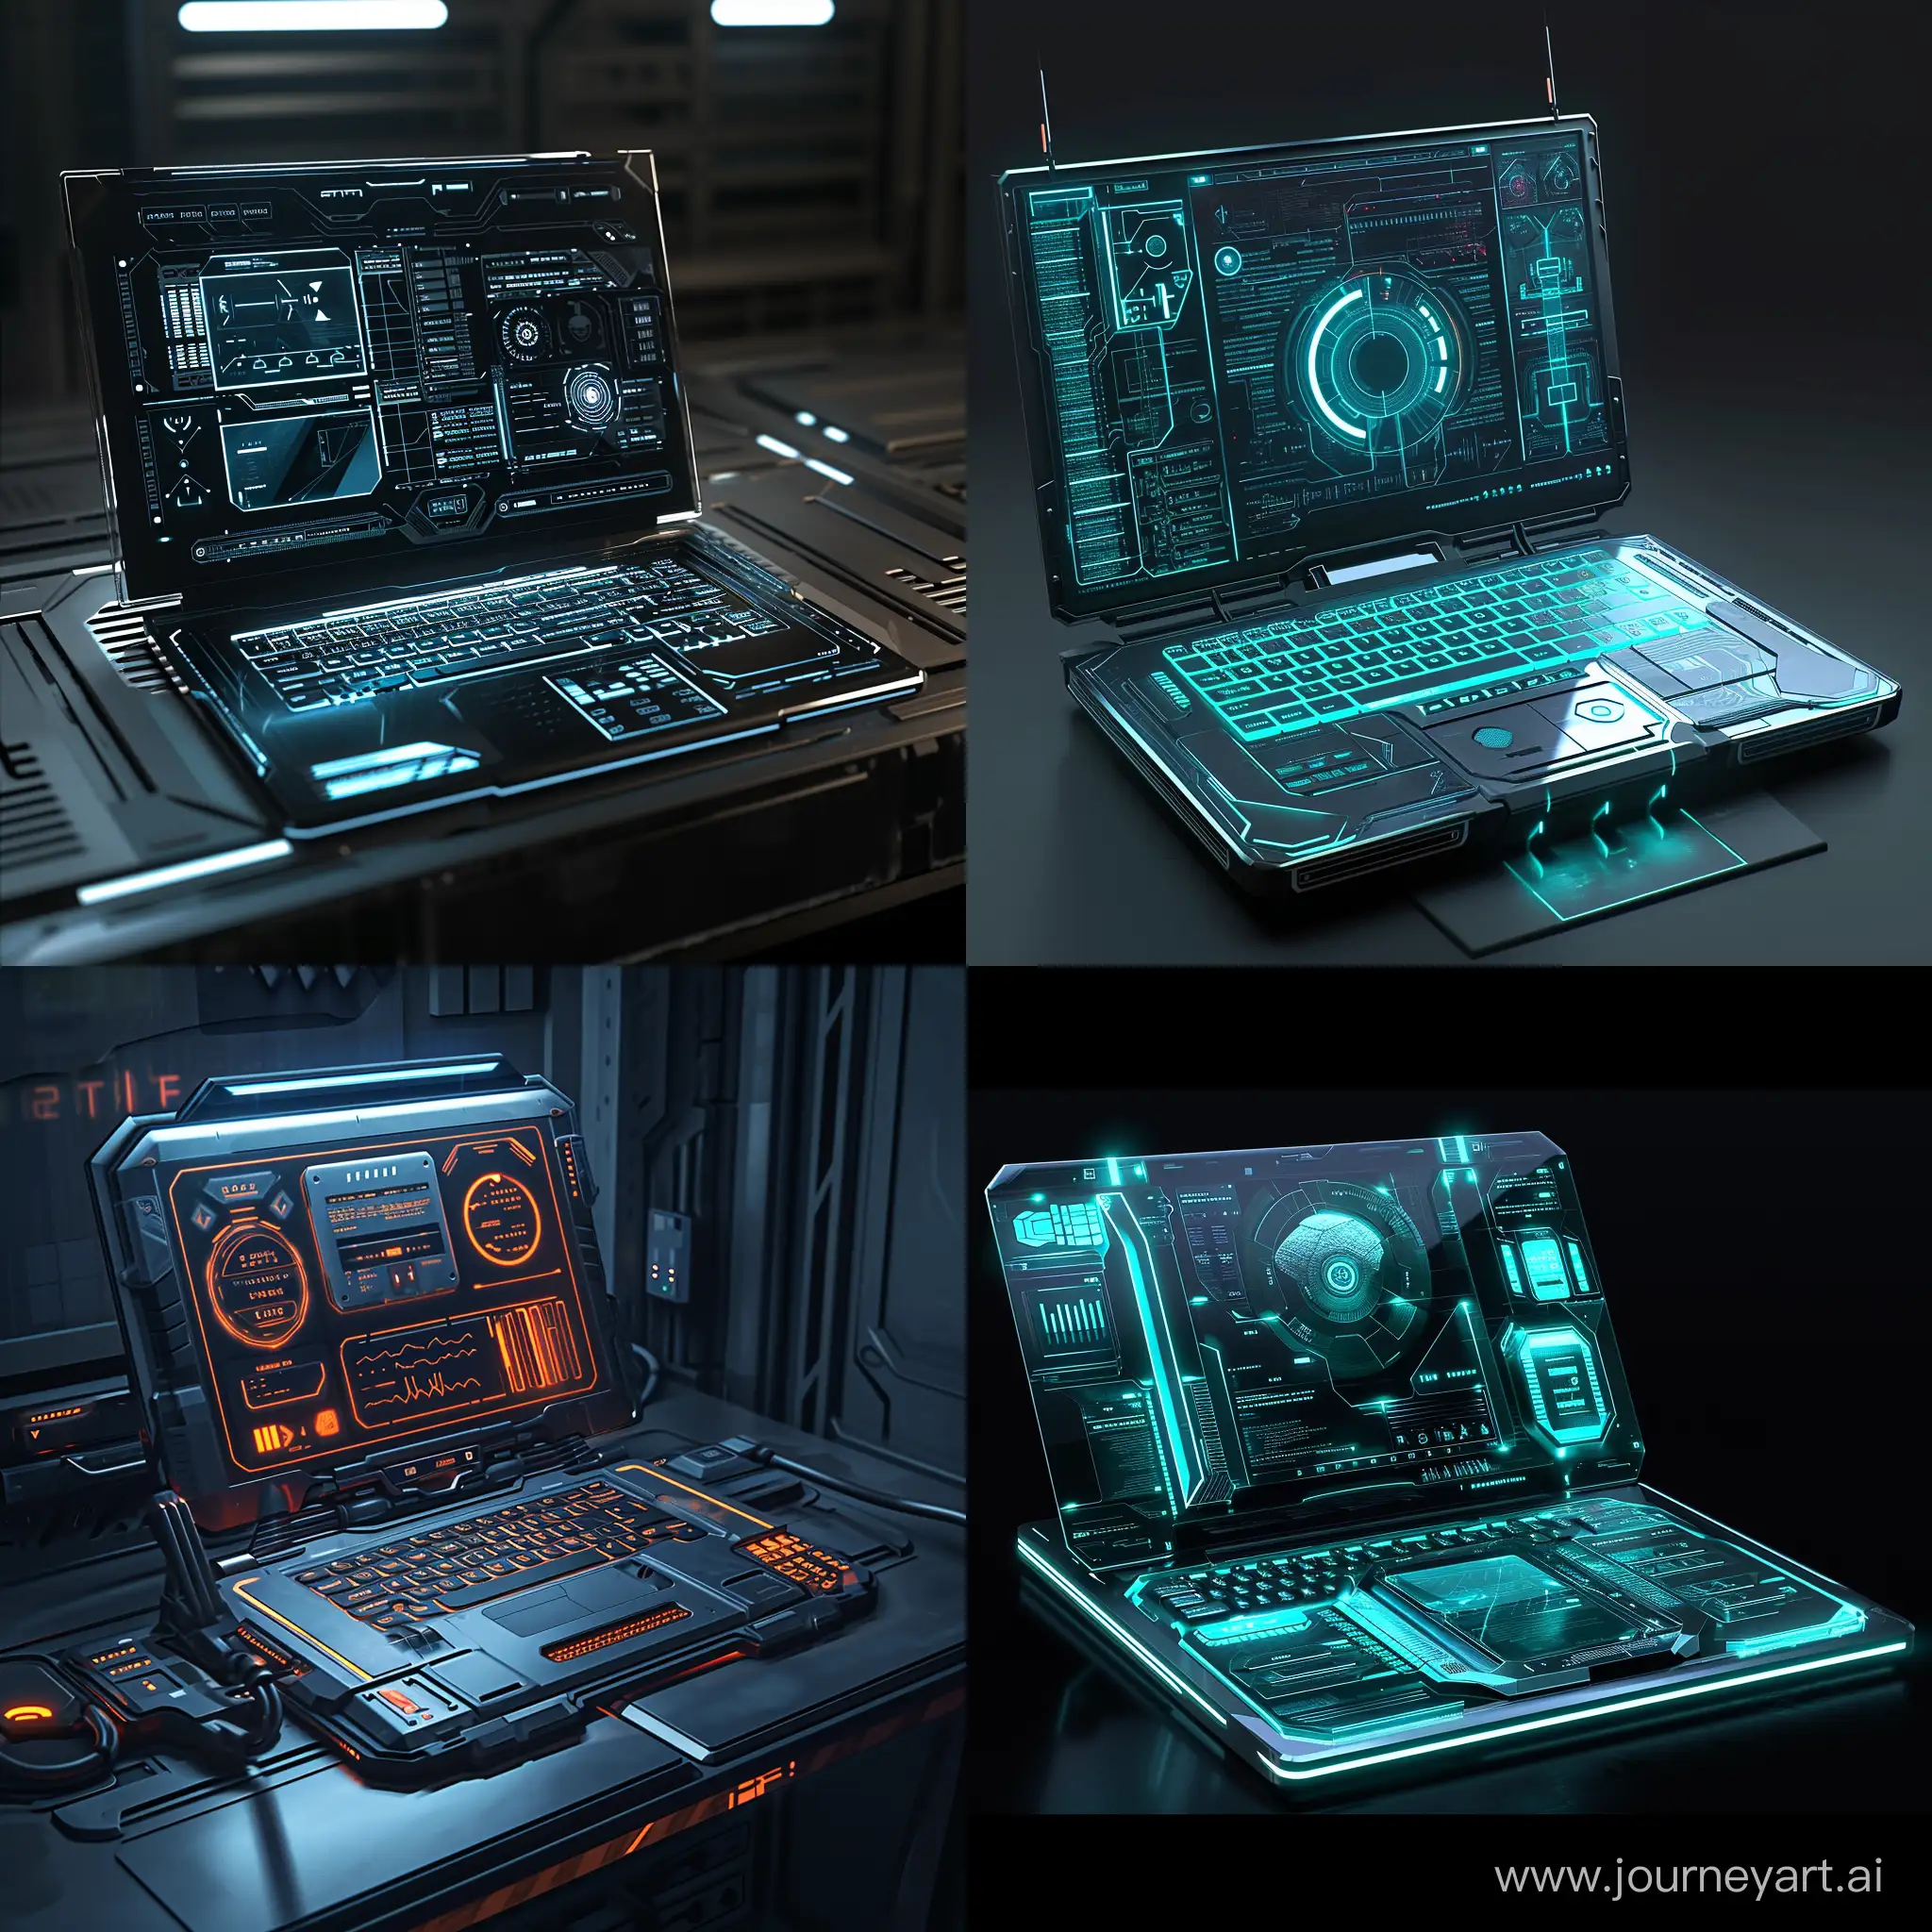 Futuristic-HighTech-Laptop-in-Science-Fiction-Setting